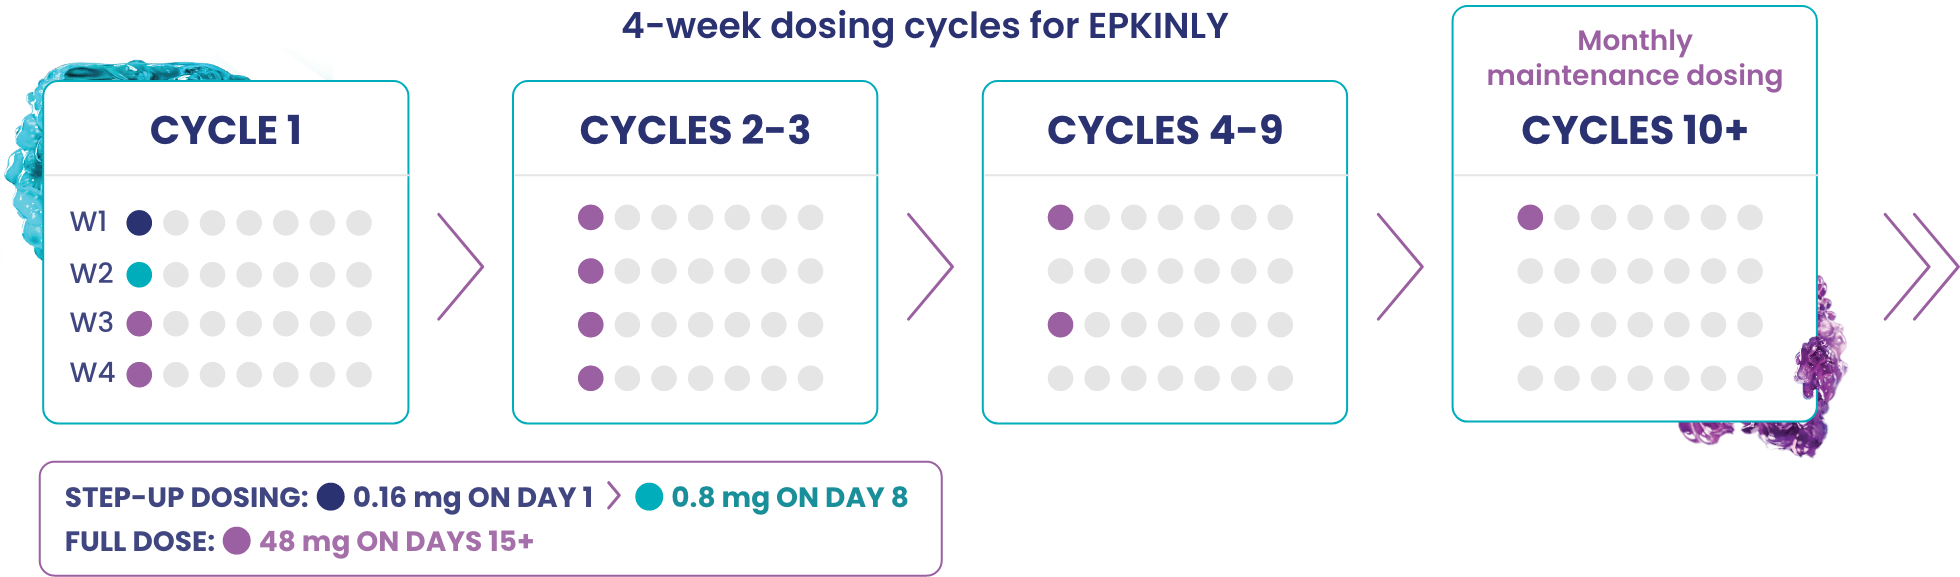 EPKINLY™ is dosed in four week cycles. Cycle 1 utilizes step­up dosing on days 1, 8, 15 and beyond. Cycles 2 through 3 are administered every week, cycles 4 through 9 are administered every two weeks and cycles 10 and after are administered every 4 weeks.